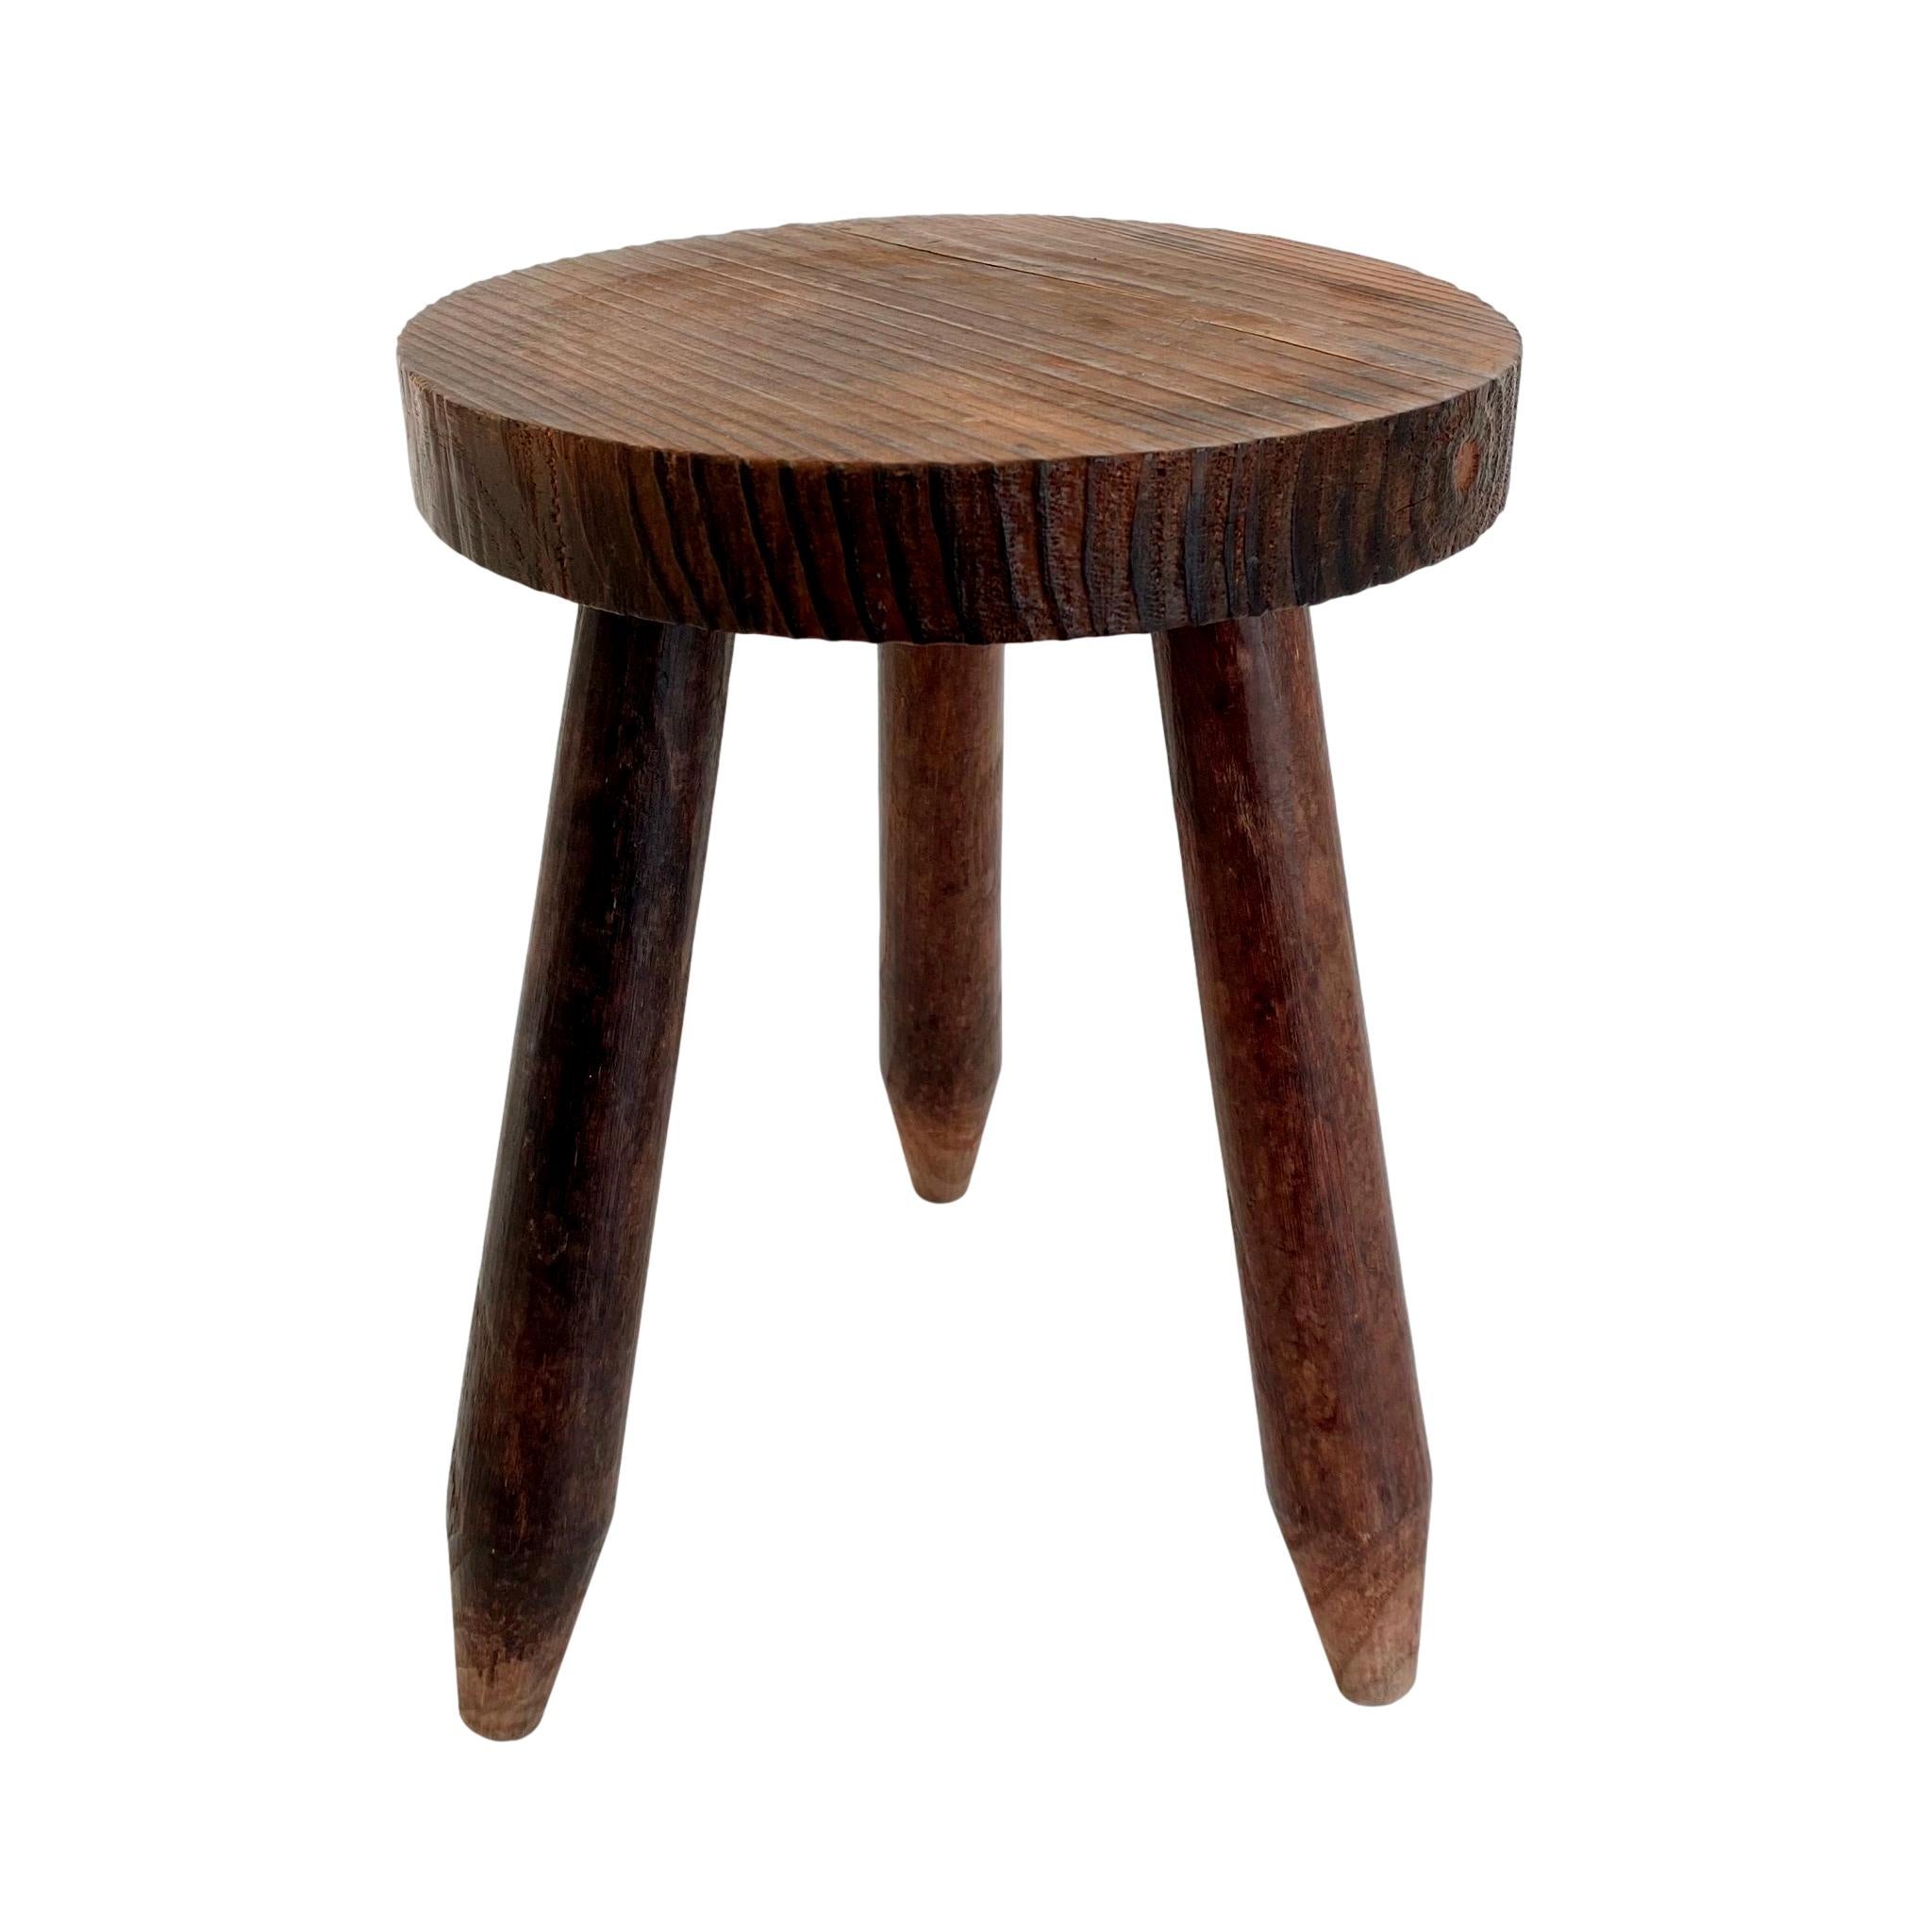 Tabouret tripode de style Perriand